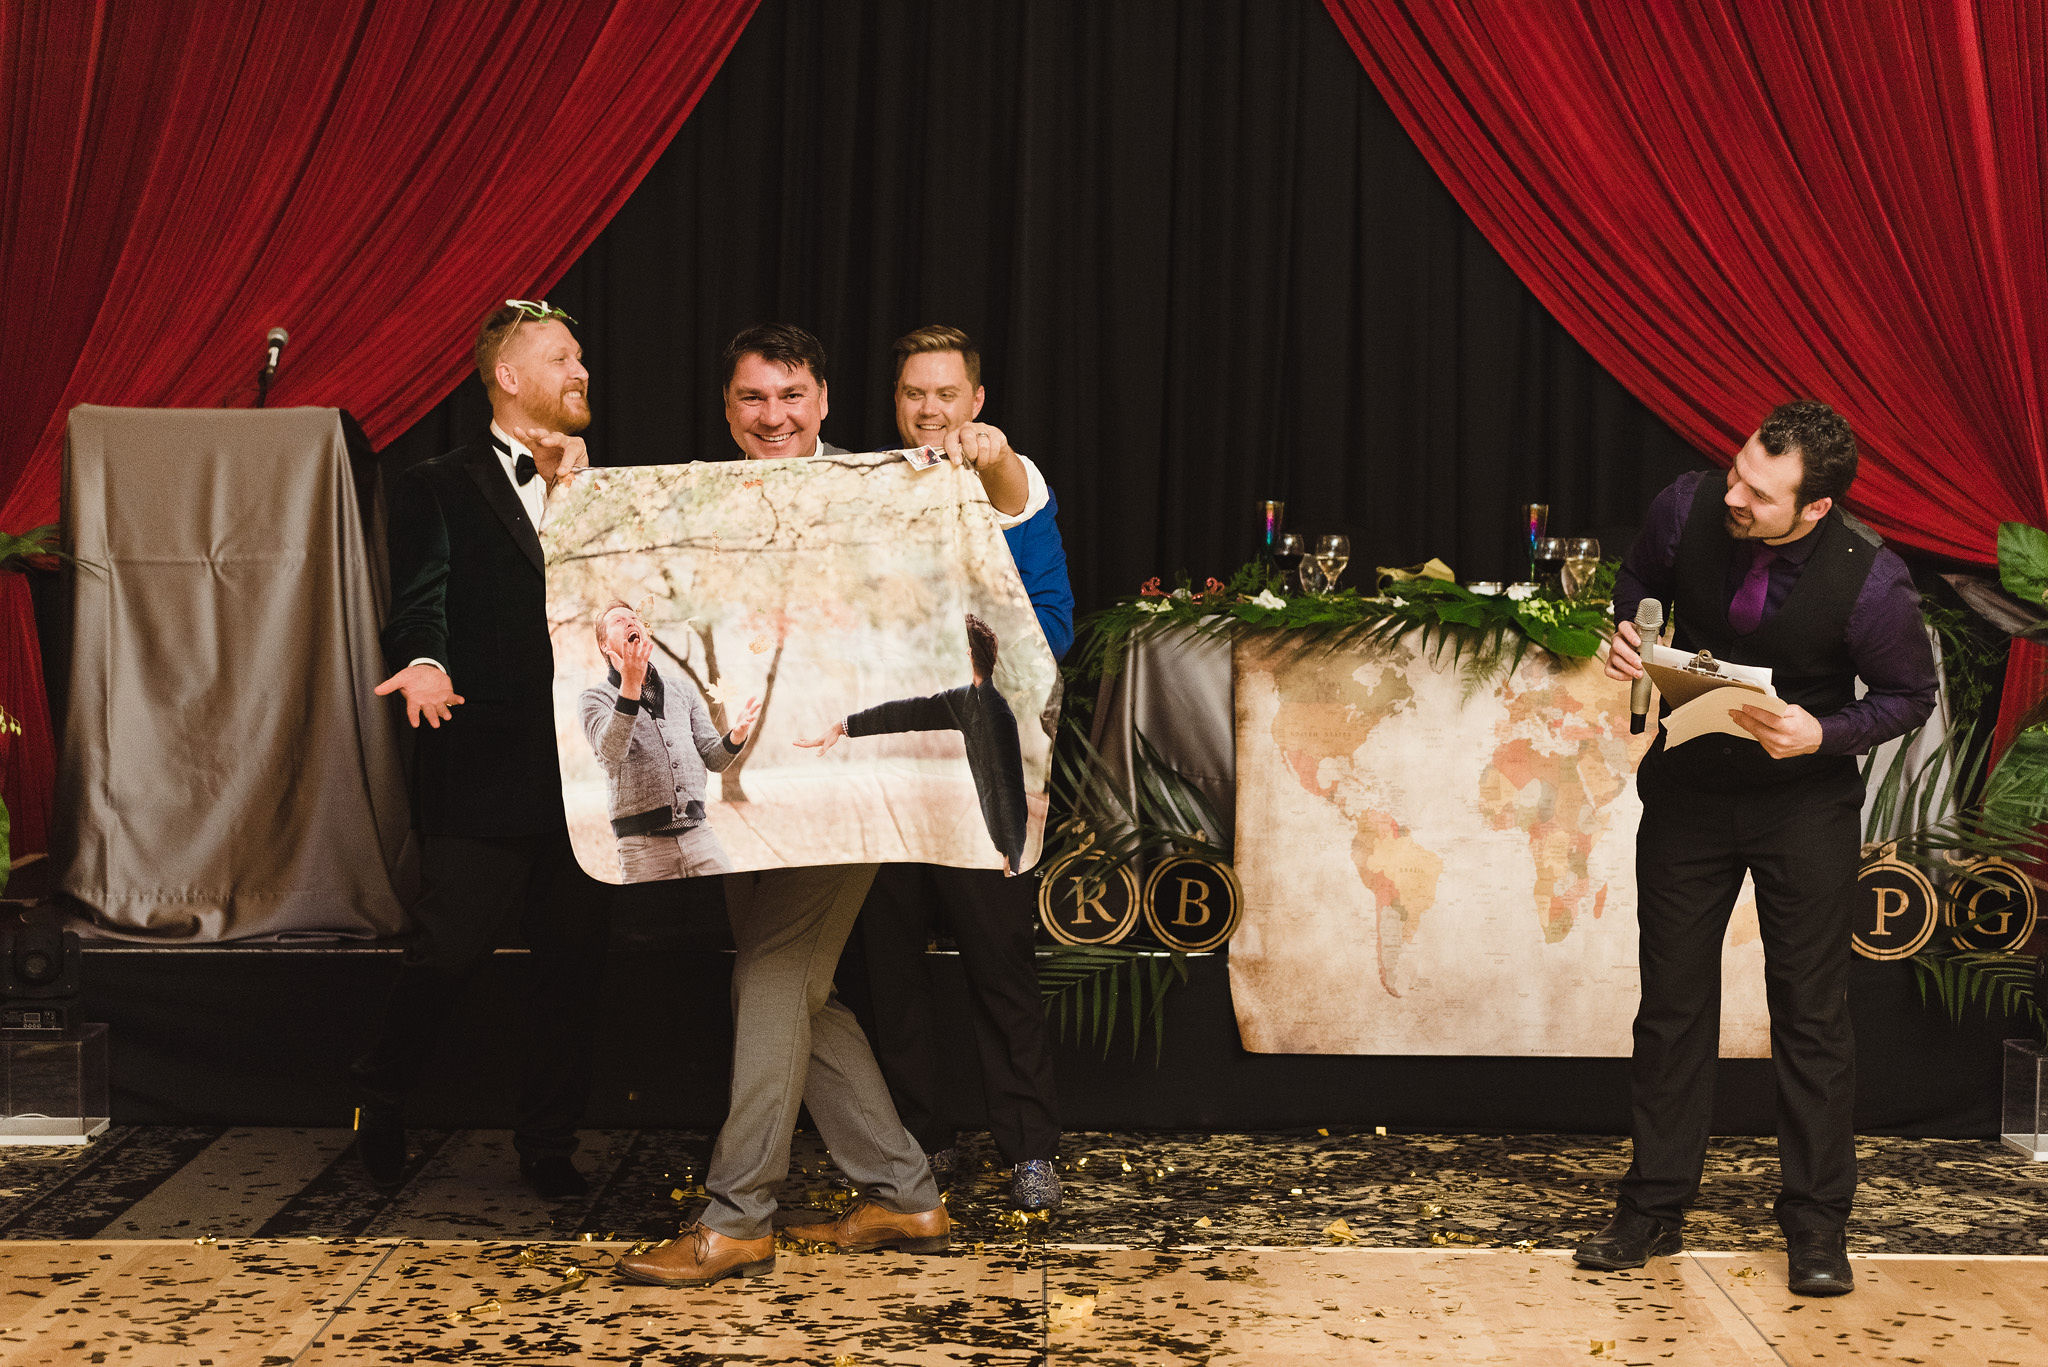 wedding guest holding up large picture of the grooms during the fun wedding reception at the Hilton Fallsview in Niagara Falls